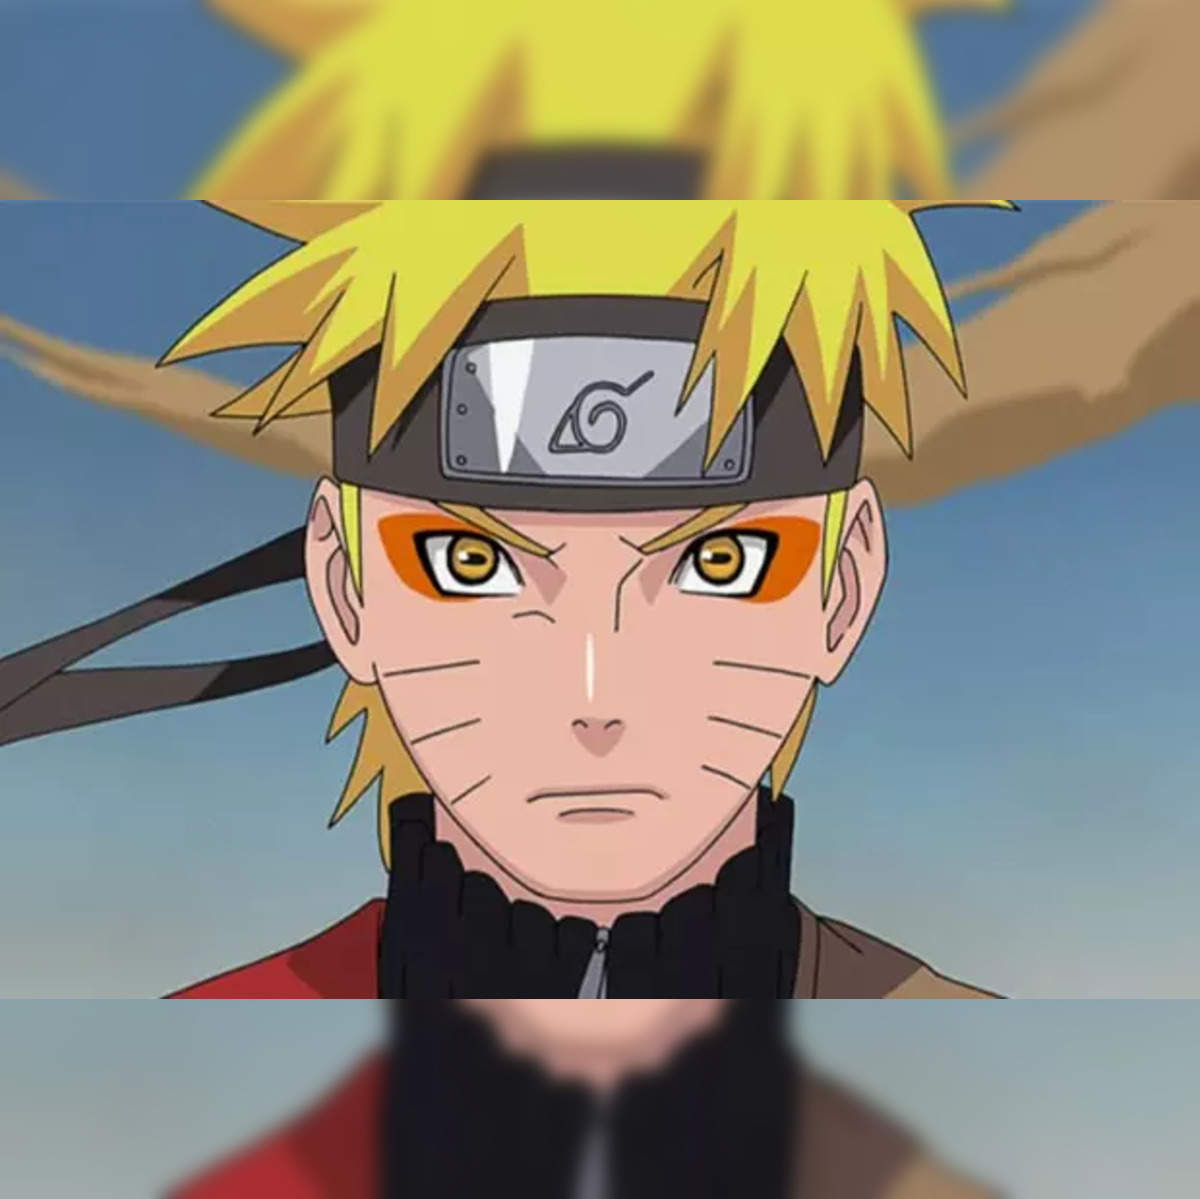 Naruto Game Series Order - Anime and Gaming Guides & Information